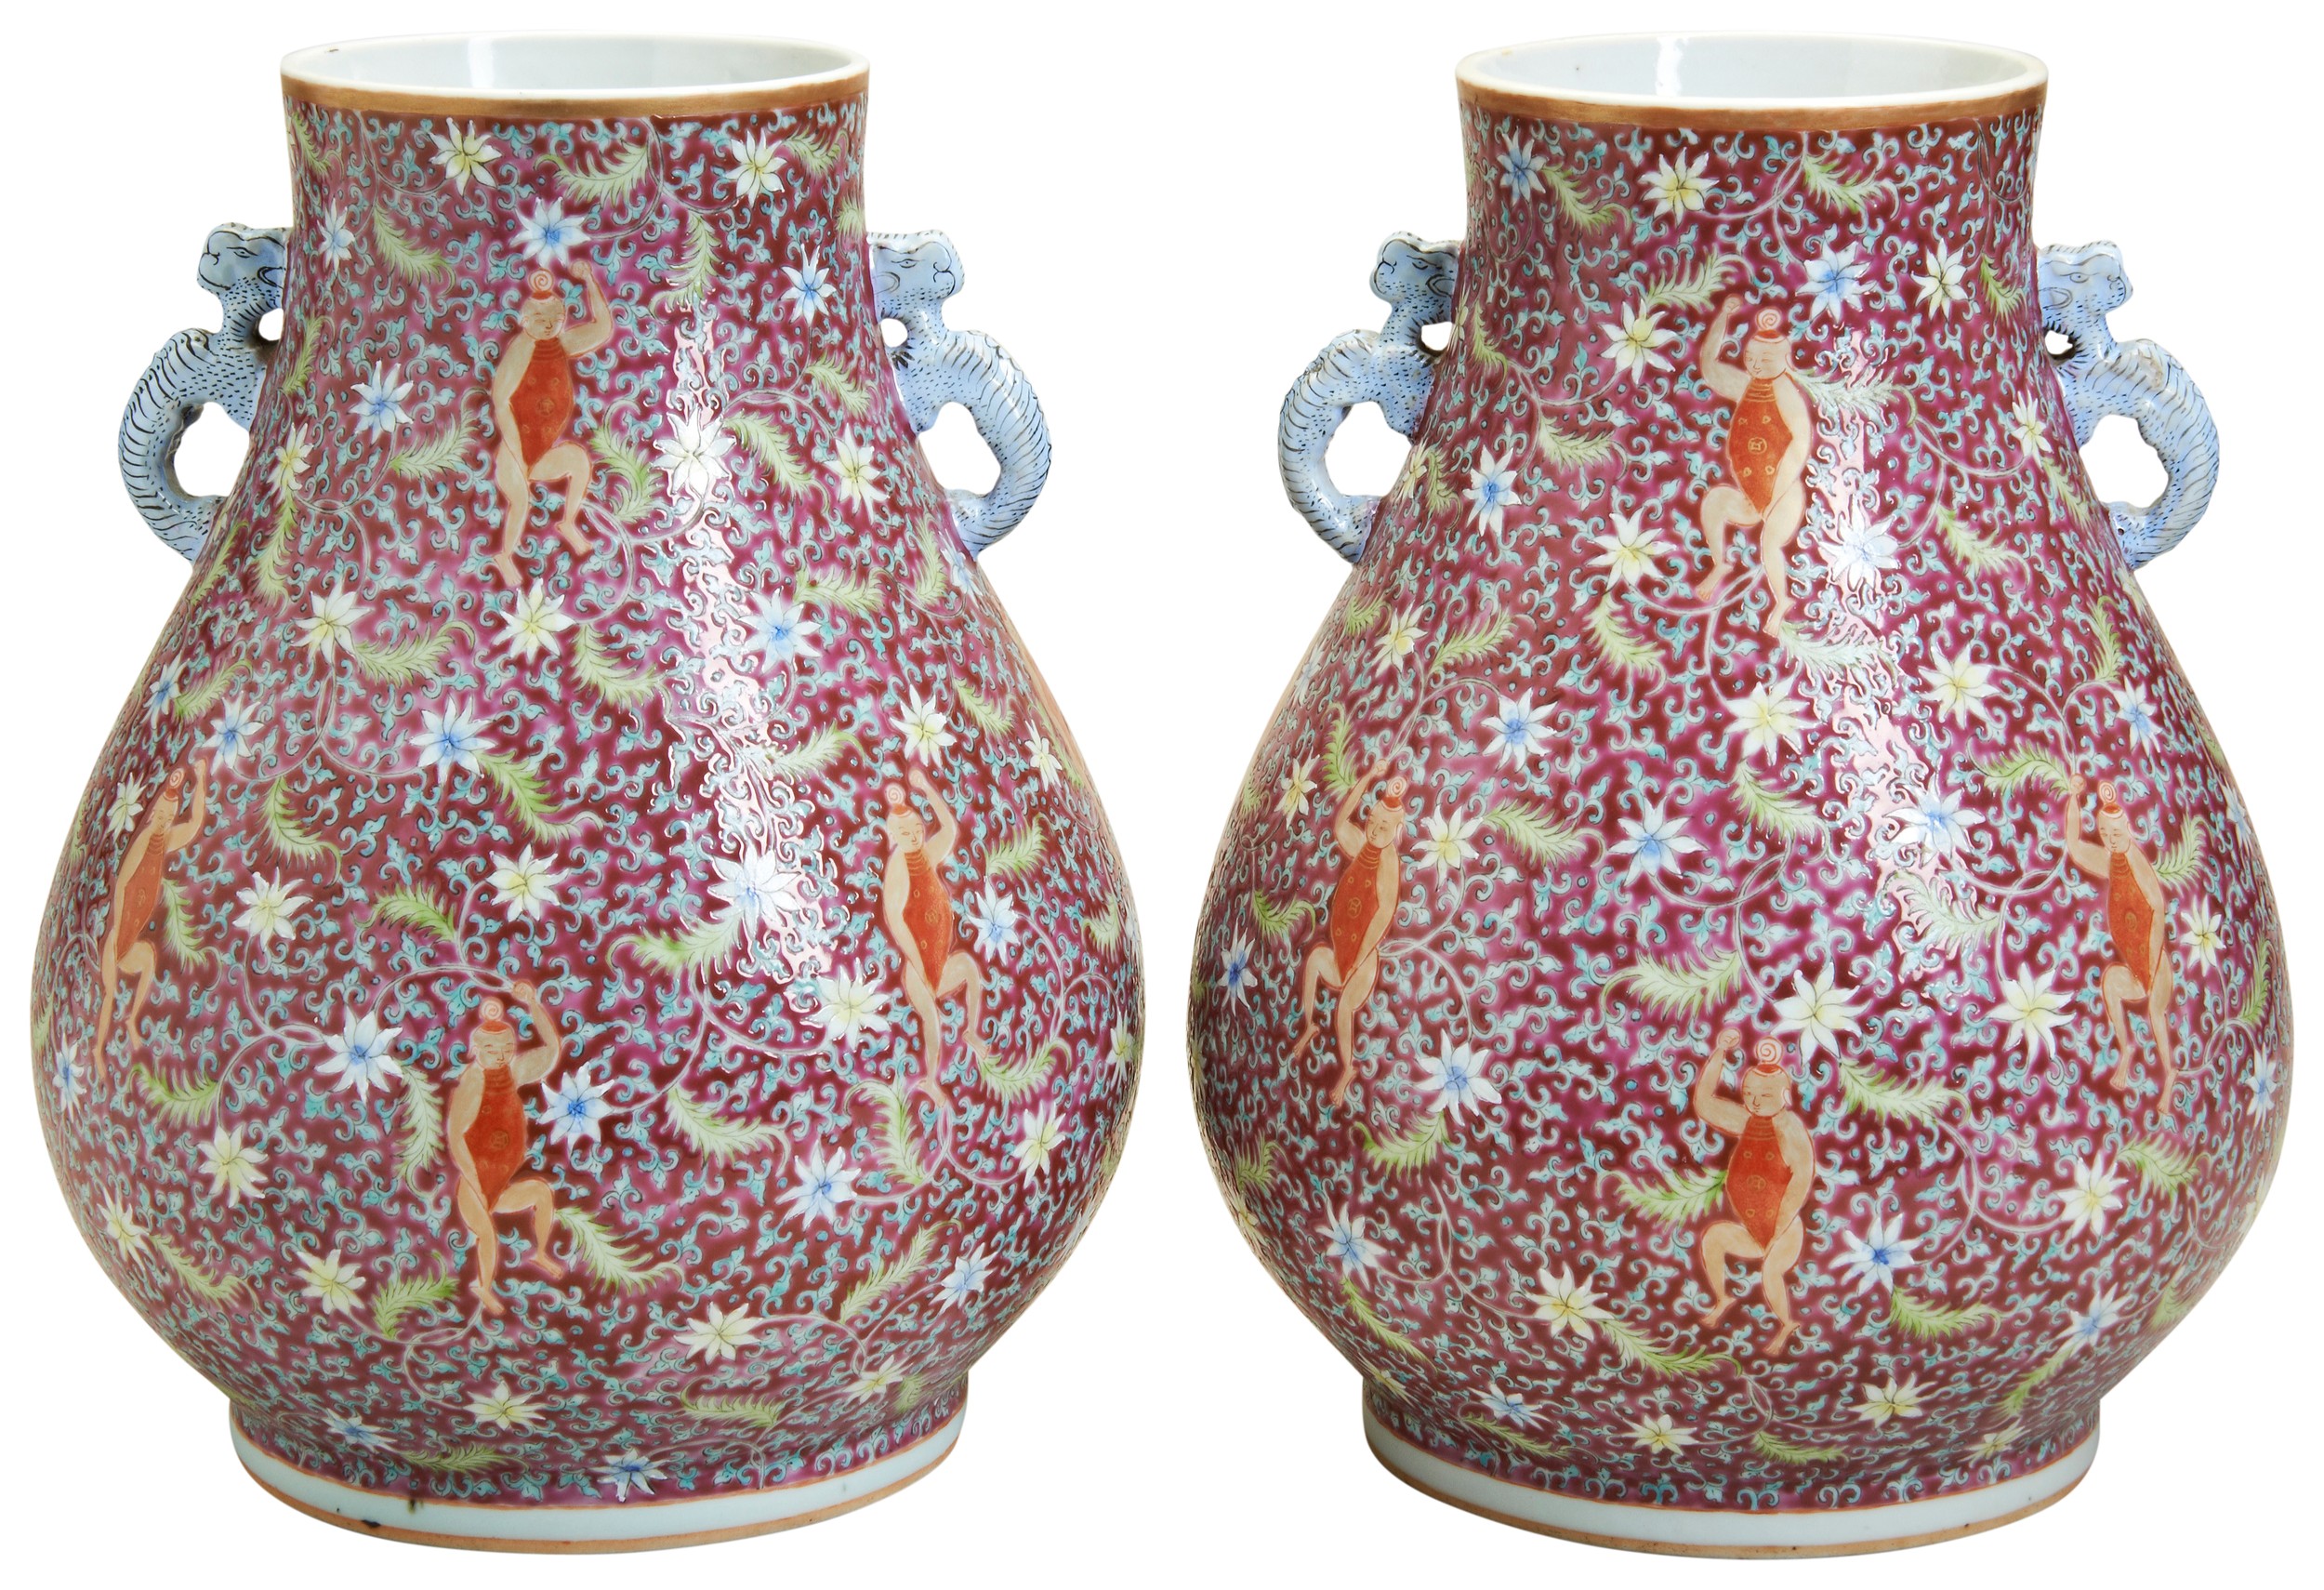 A PAIR OF FAMILLE ROSE PINK-GROUND 'BOYS' VASES, HU LATE QING / REPUBLIC PERIOD 清 粉彩童子持莲瓶一对 the